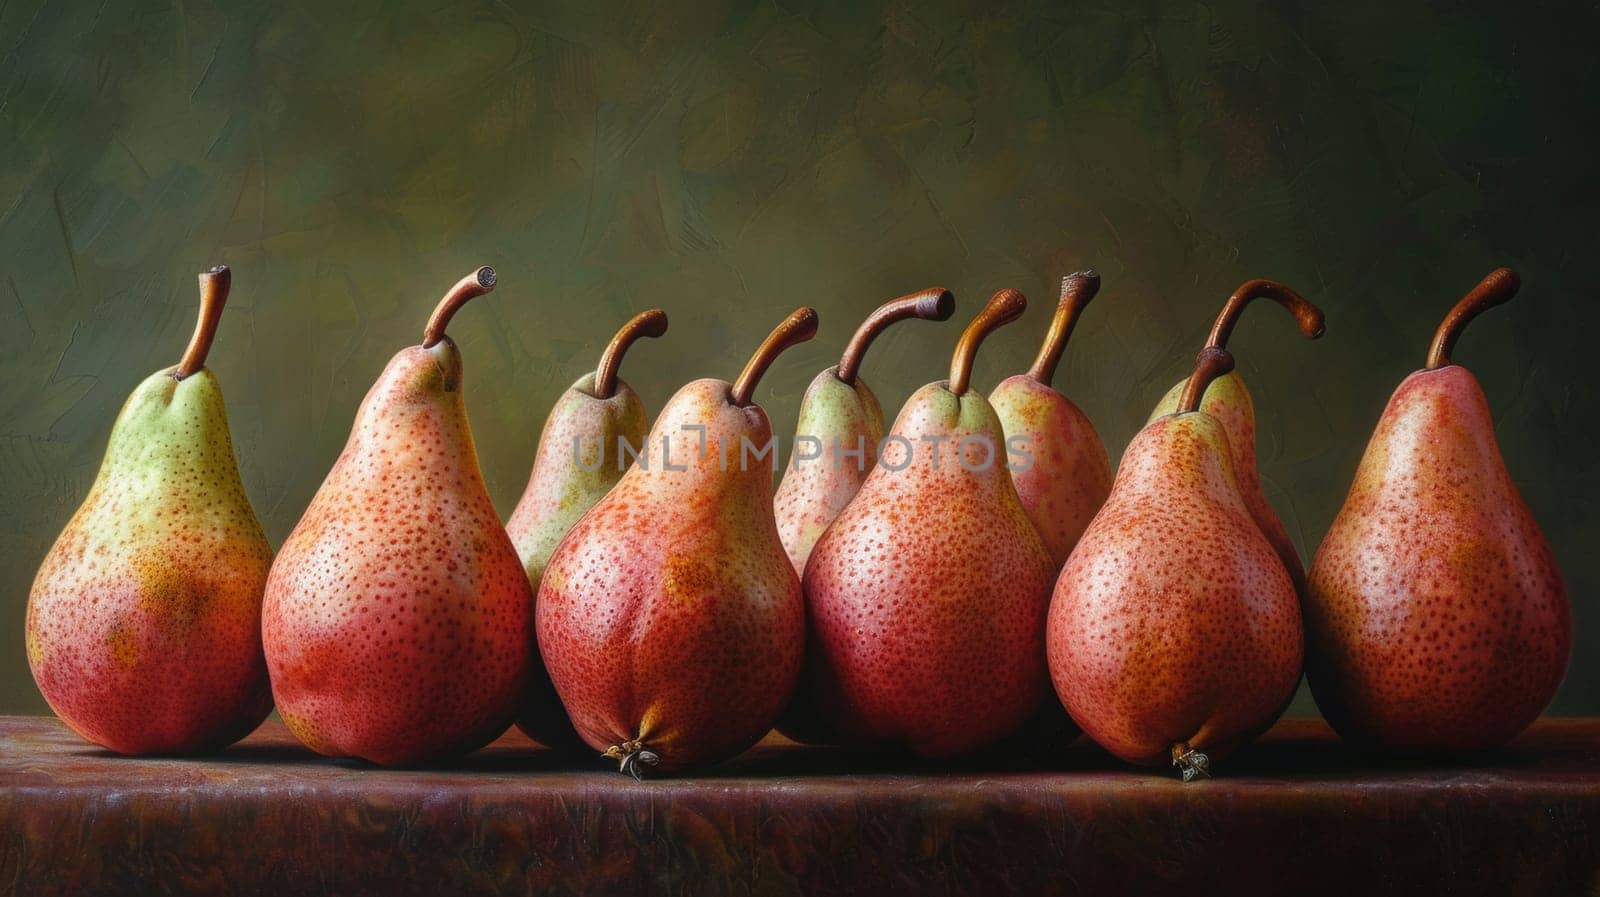 A row of pears are lined up on a table in front of the wall